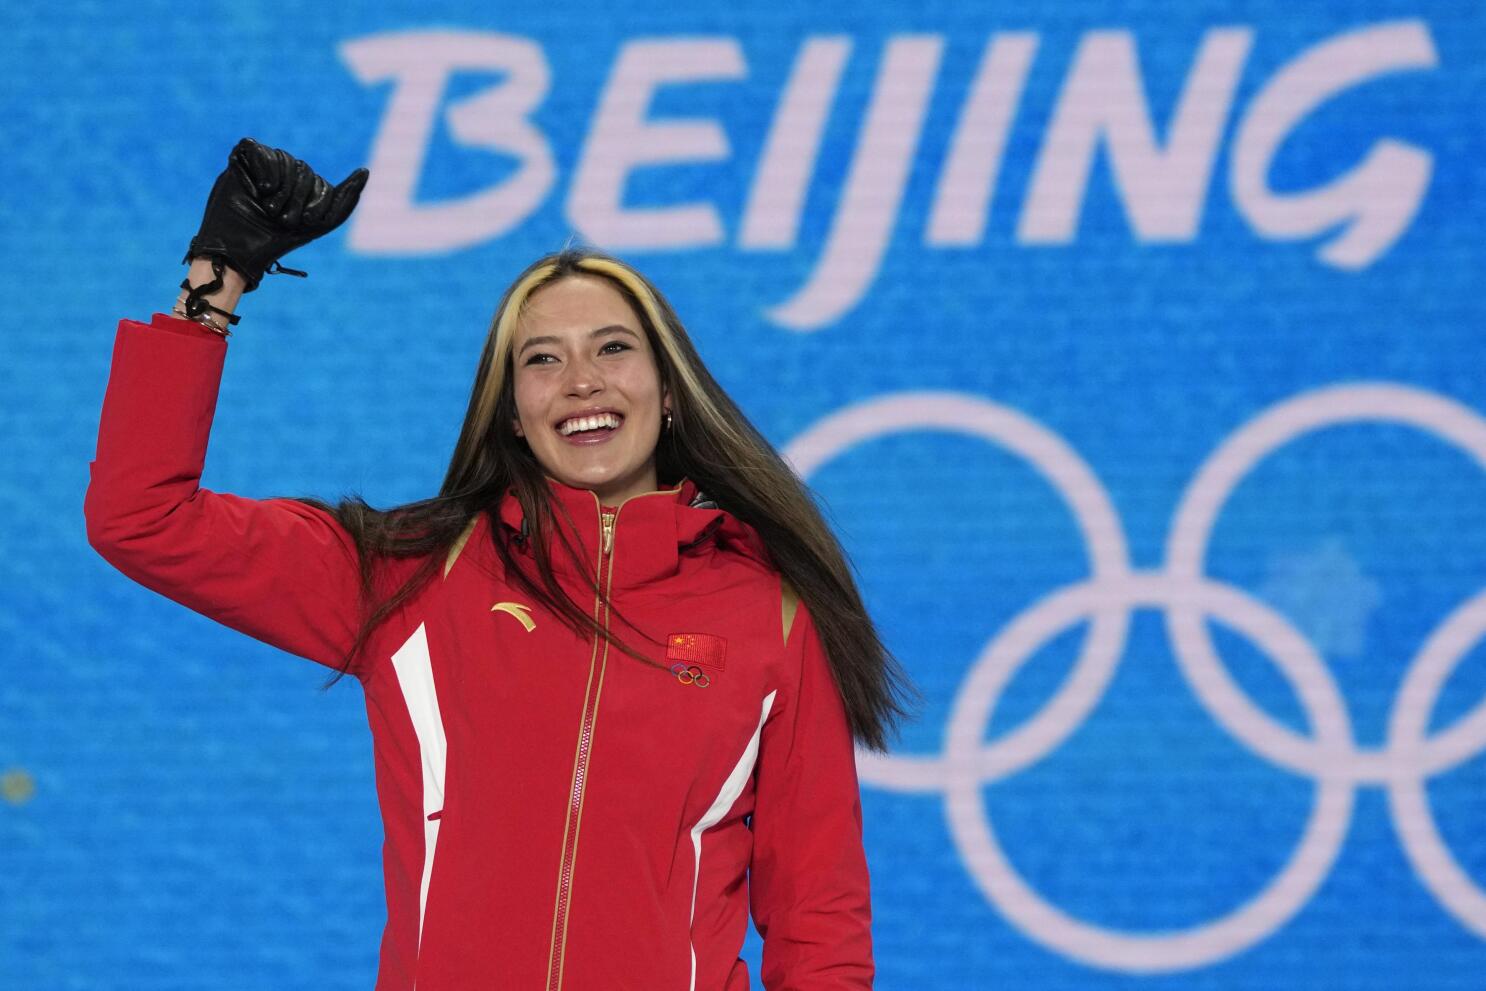 California-born Eileen Gu who won gold competing for China is